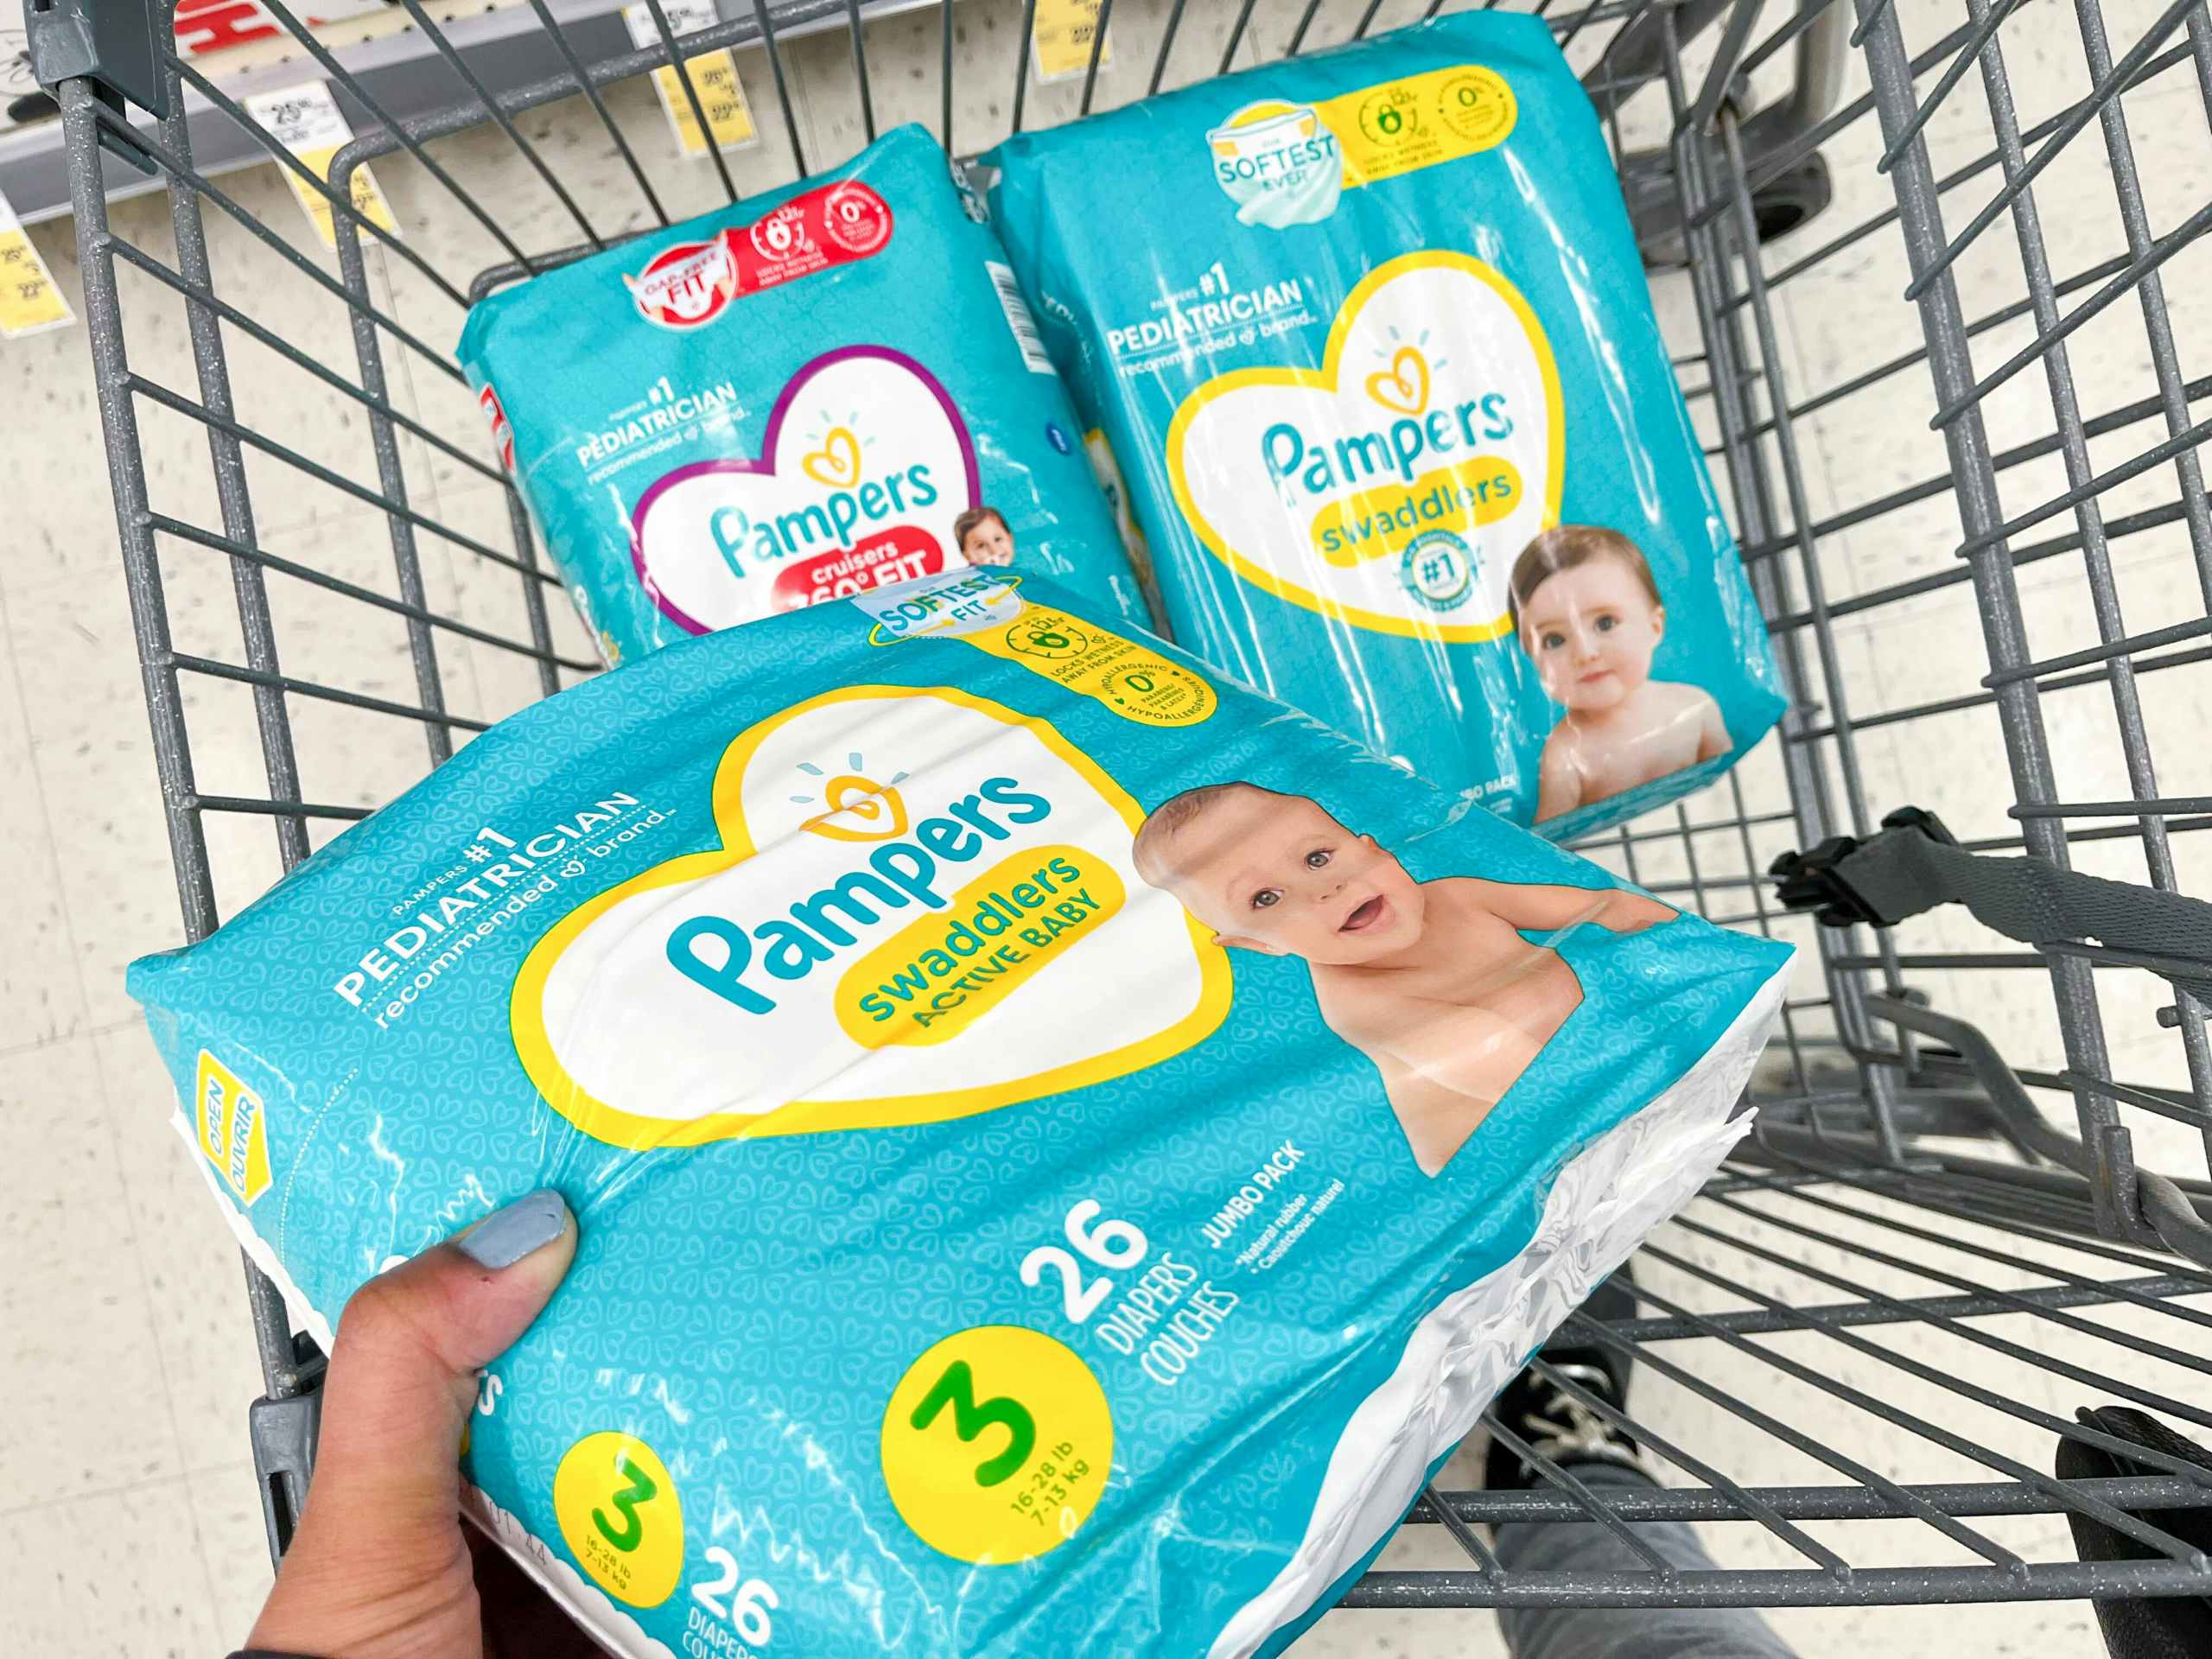 A person putting a pack of Pameprs diapers in a grocery cart with other diapers in it.